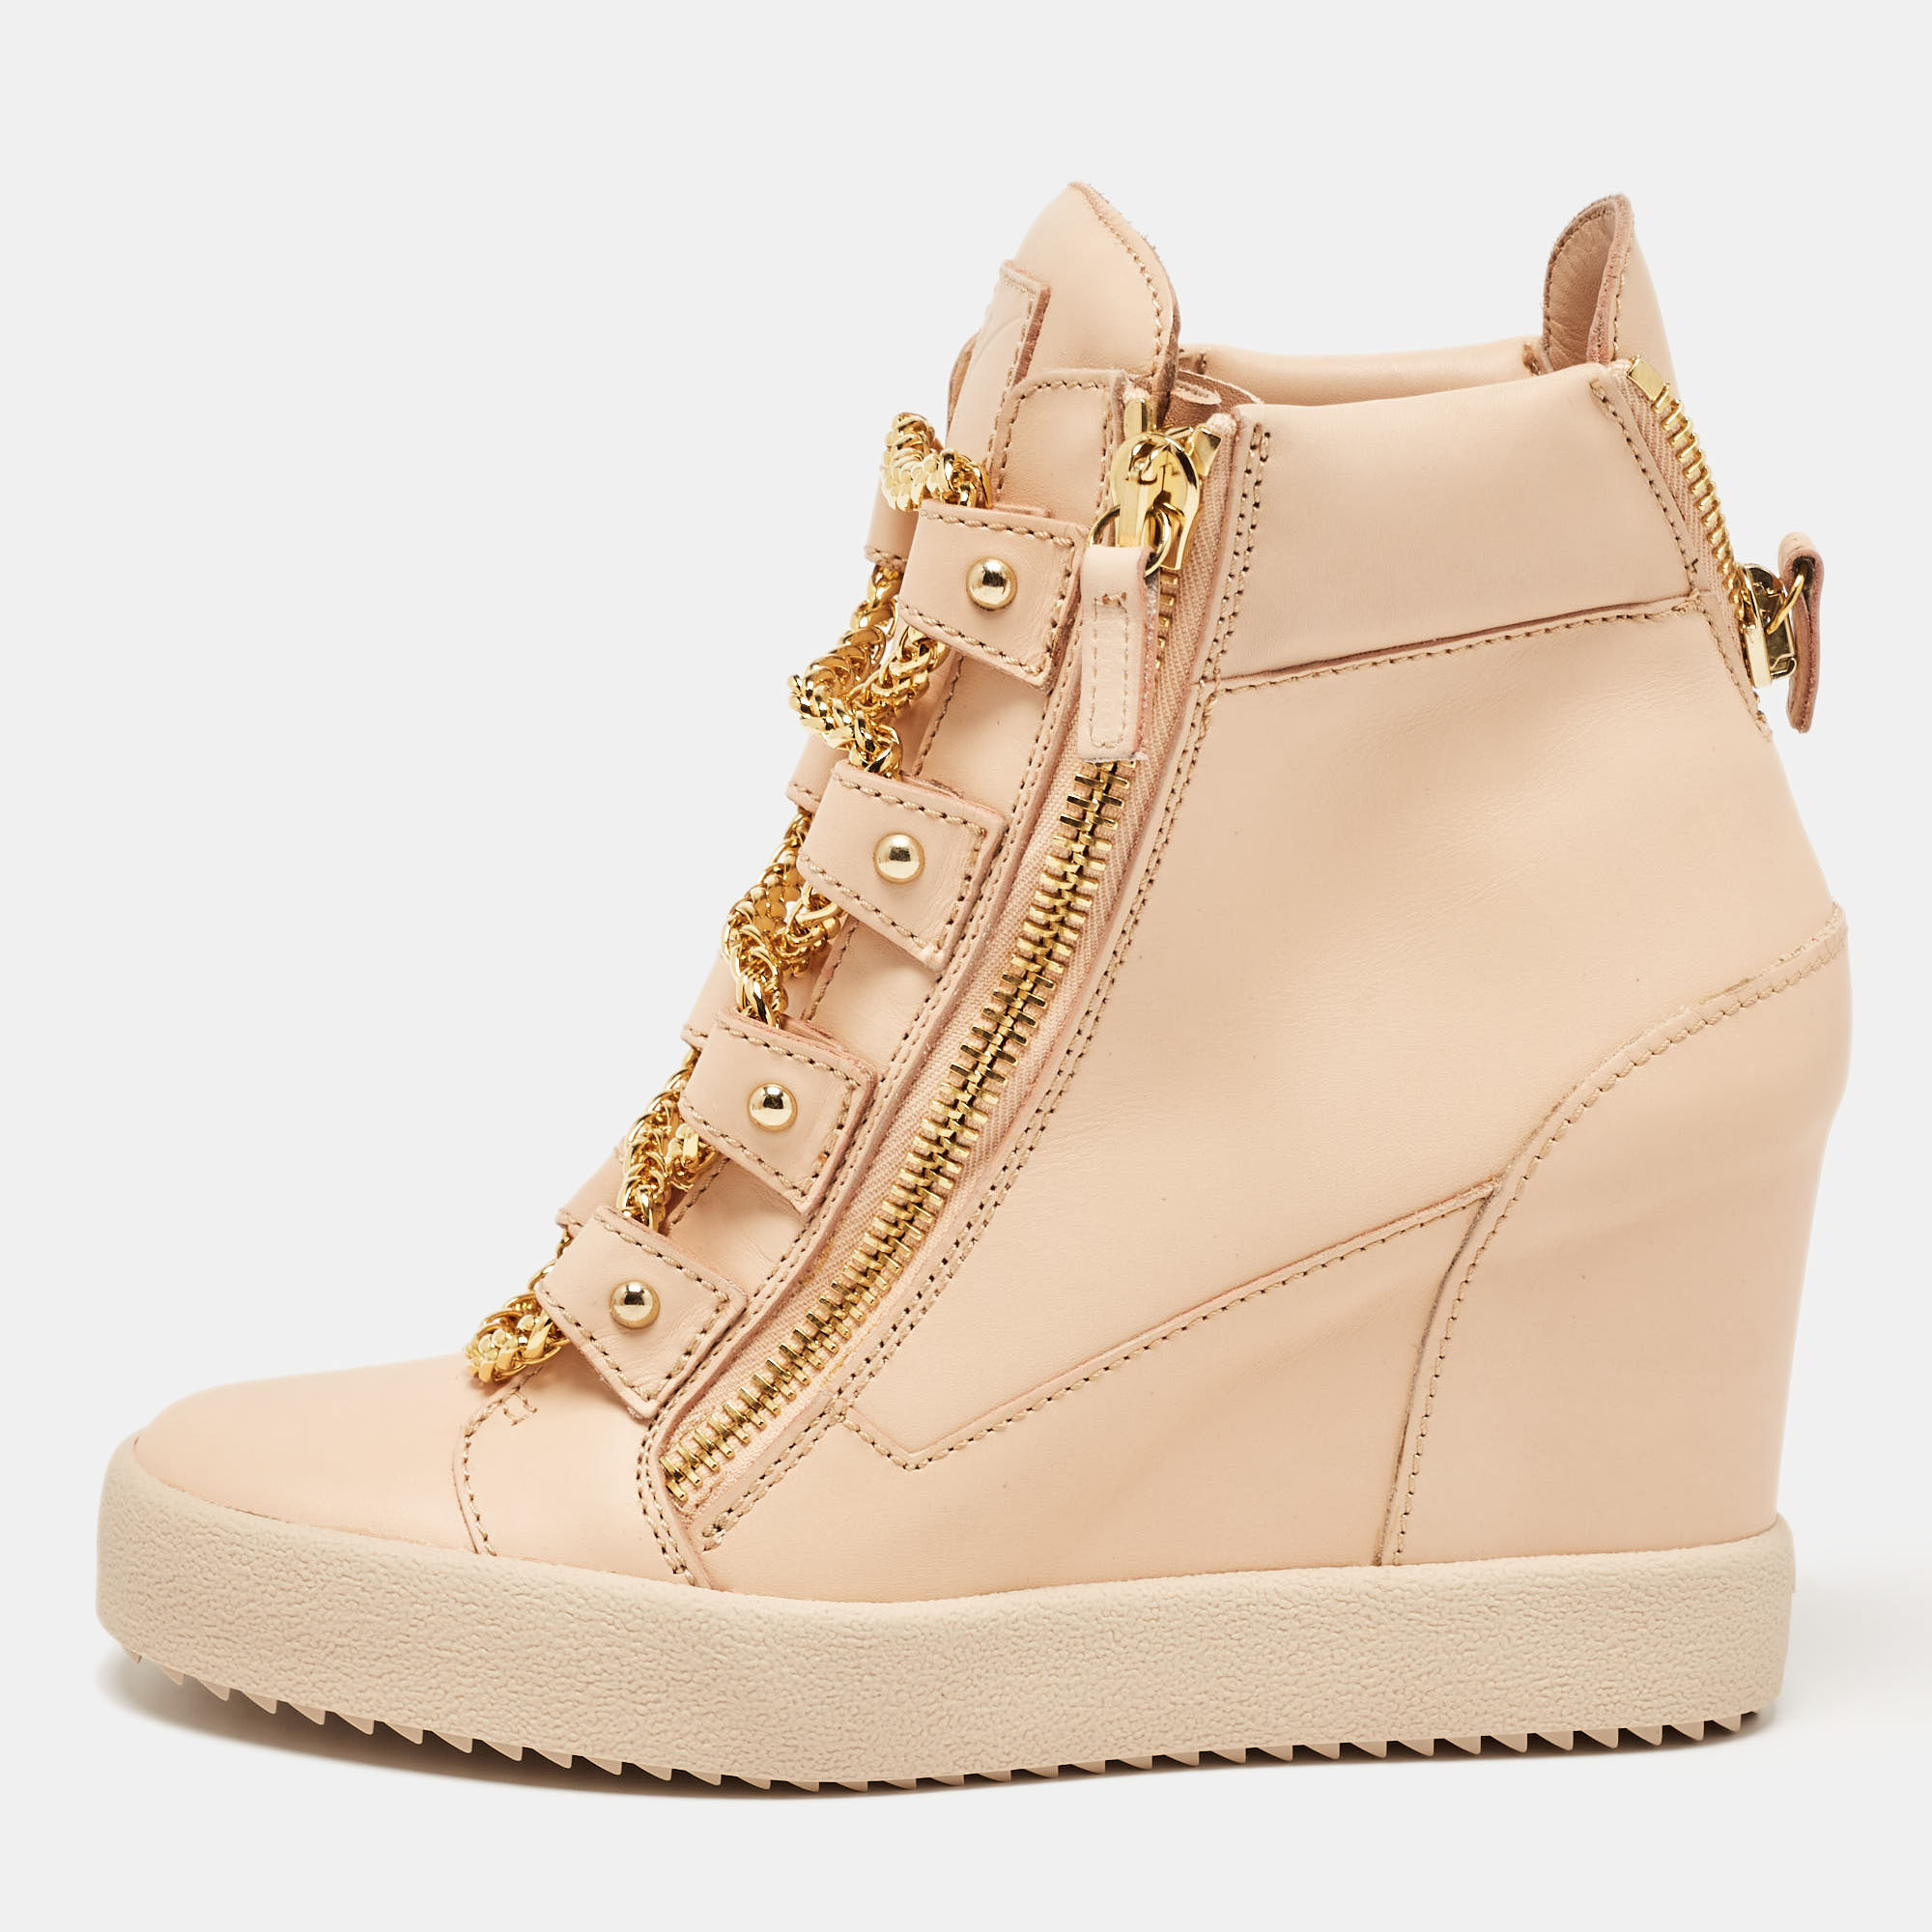 Giuseppe zanotti beige leather chain detail high top wedge sneakers size 41